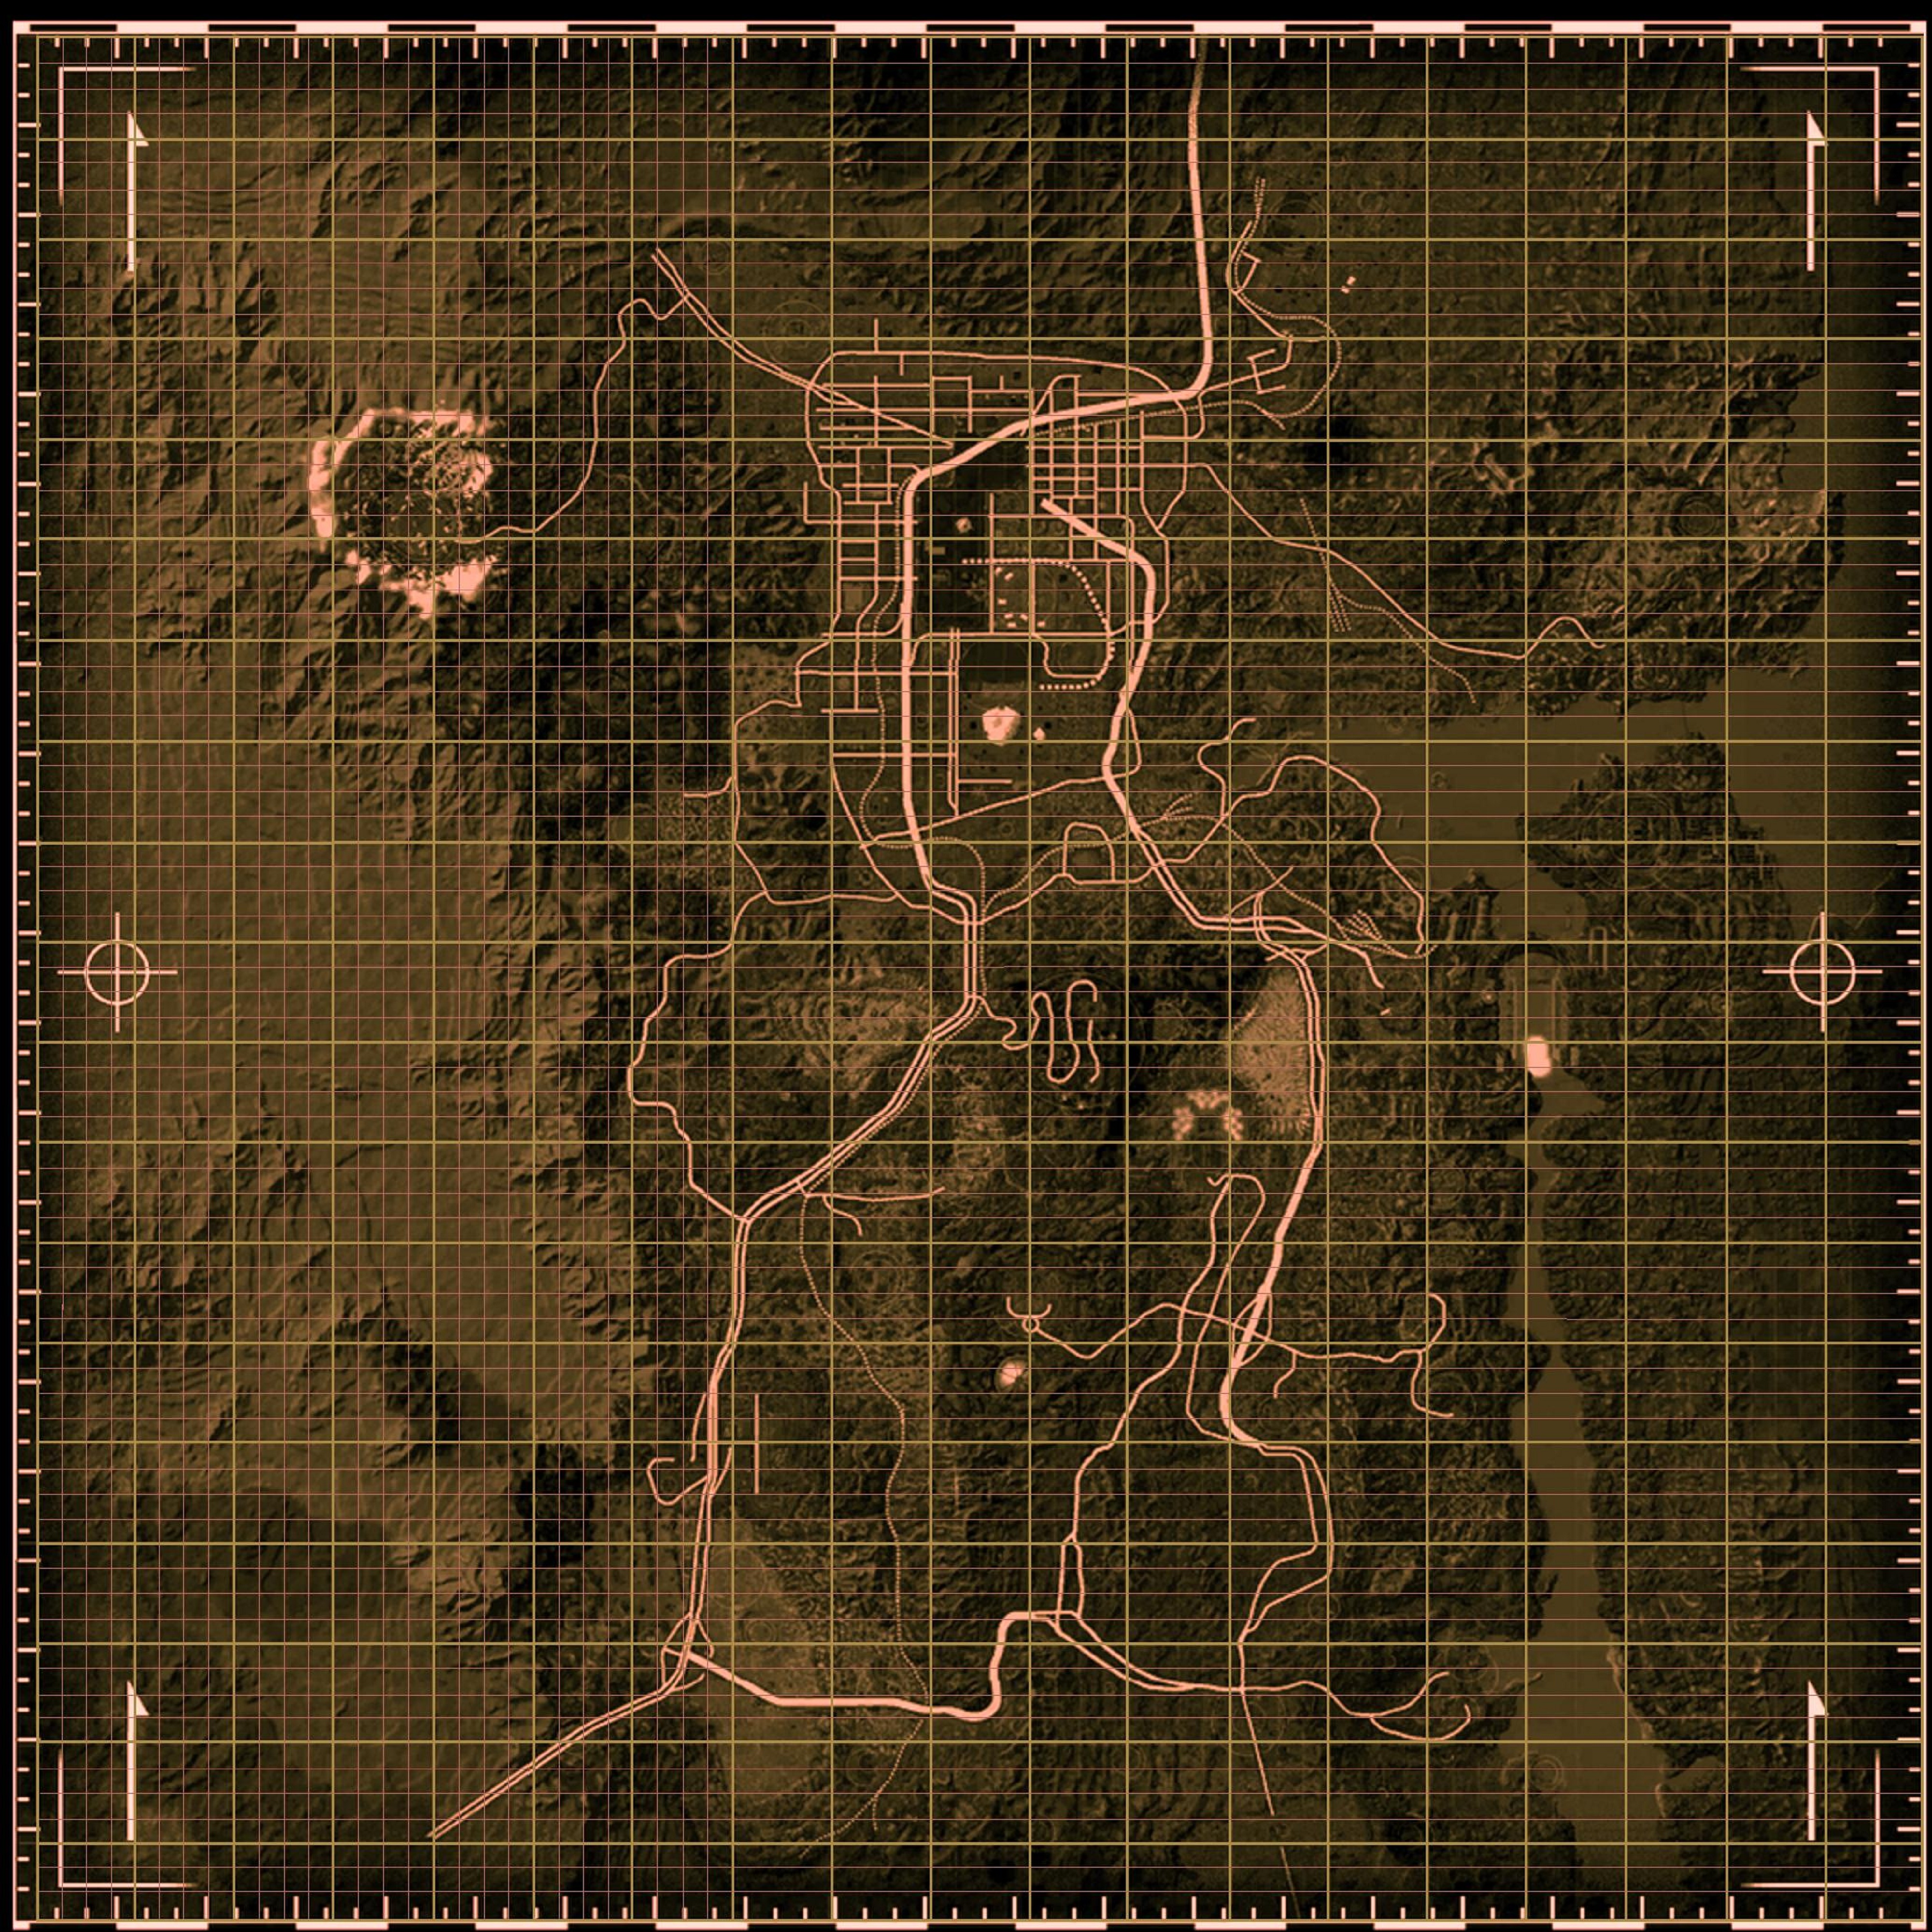 fallout new vegas locations map